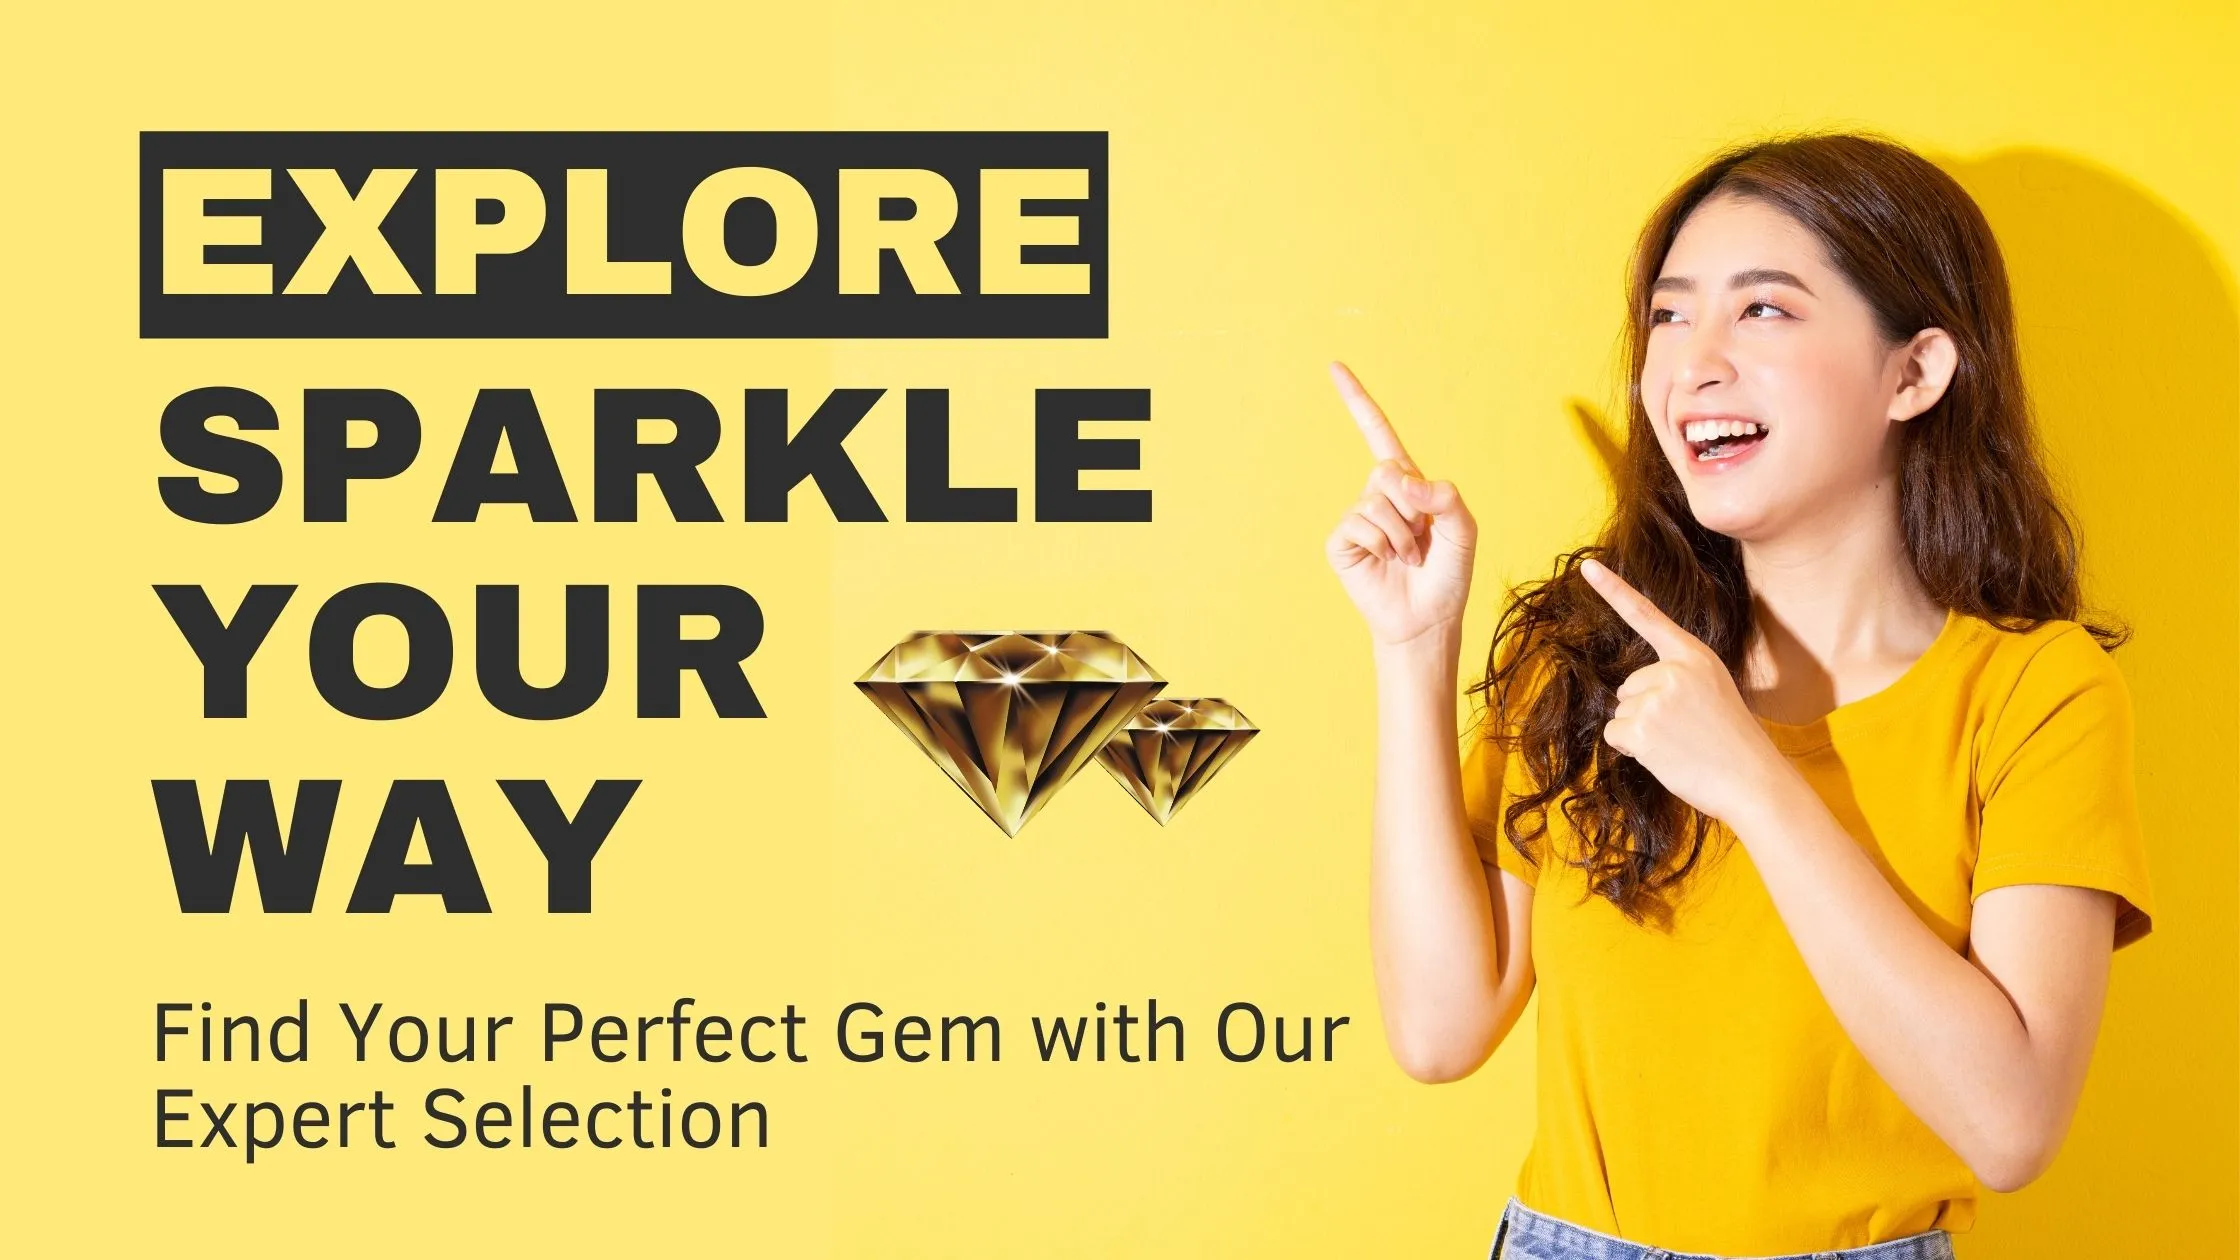 A cheerful woman in a yellow shirt is pointing up and smiling, standing against a matching yellow background. Above her are bold black letters stating 'EXPLORE SPARKLE YOUR WAY,' and below is a subtitle 'Find Your Perfect Gem with Our Expert Selection.' To the left, three stylized diamond graphics underscore the theme of gemstone exploration